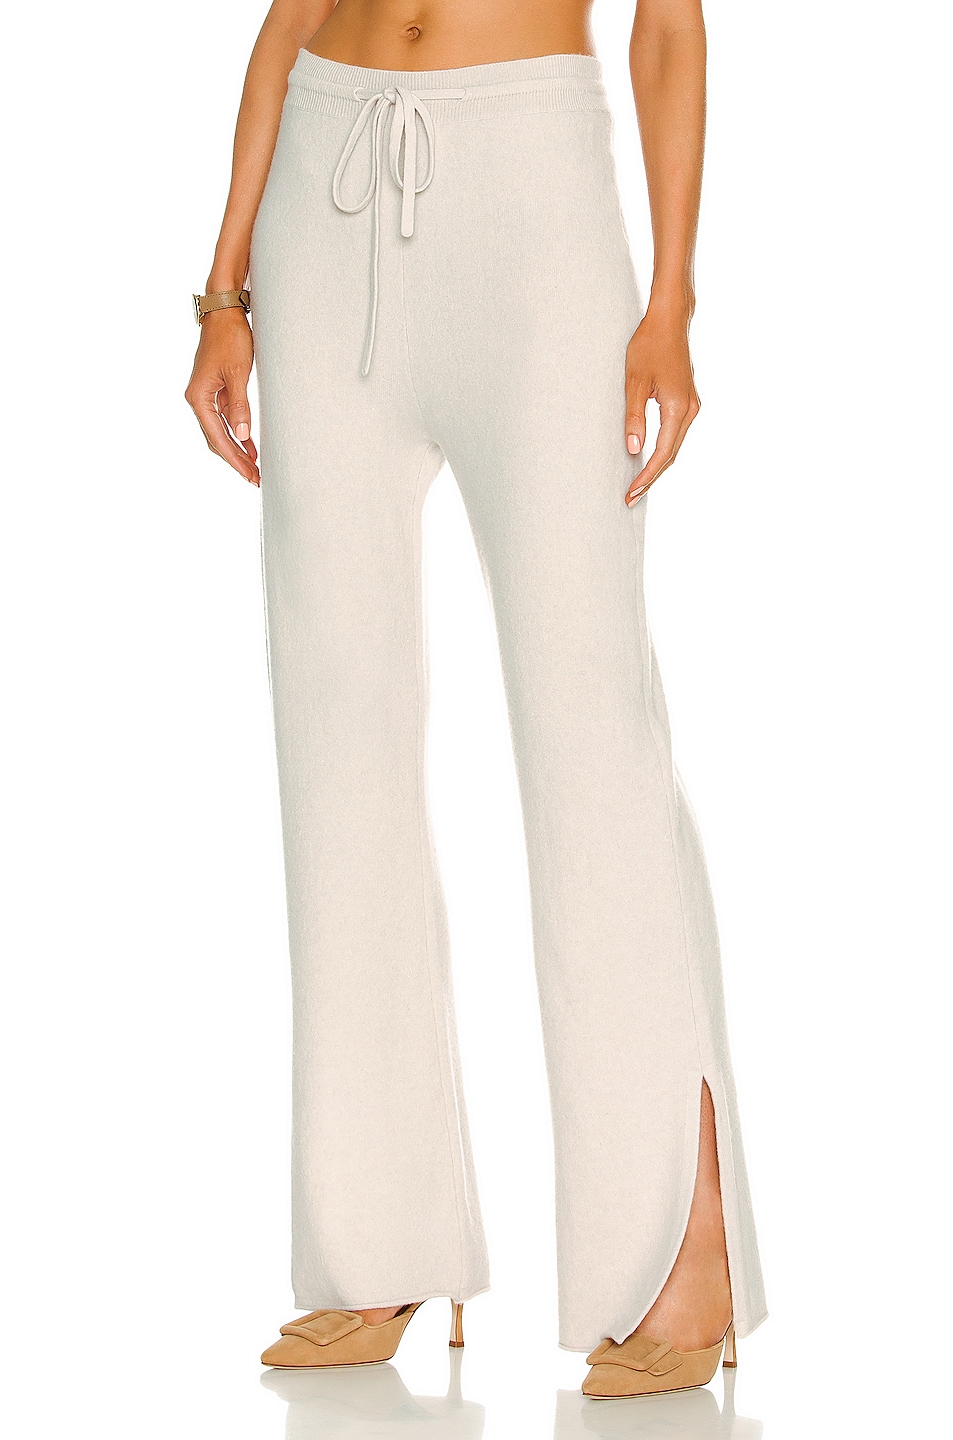 Image 1 of The Range Slit Pant in Shell Heather